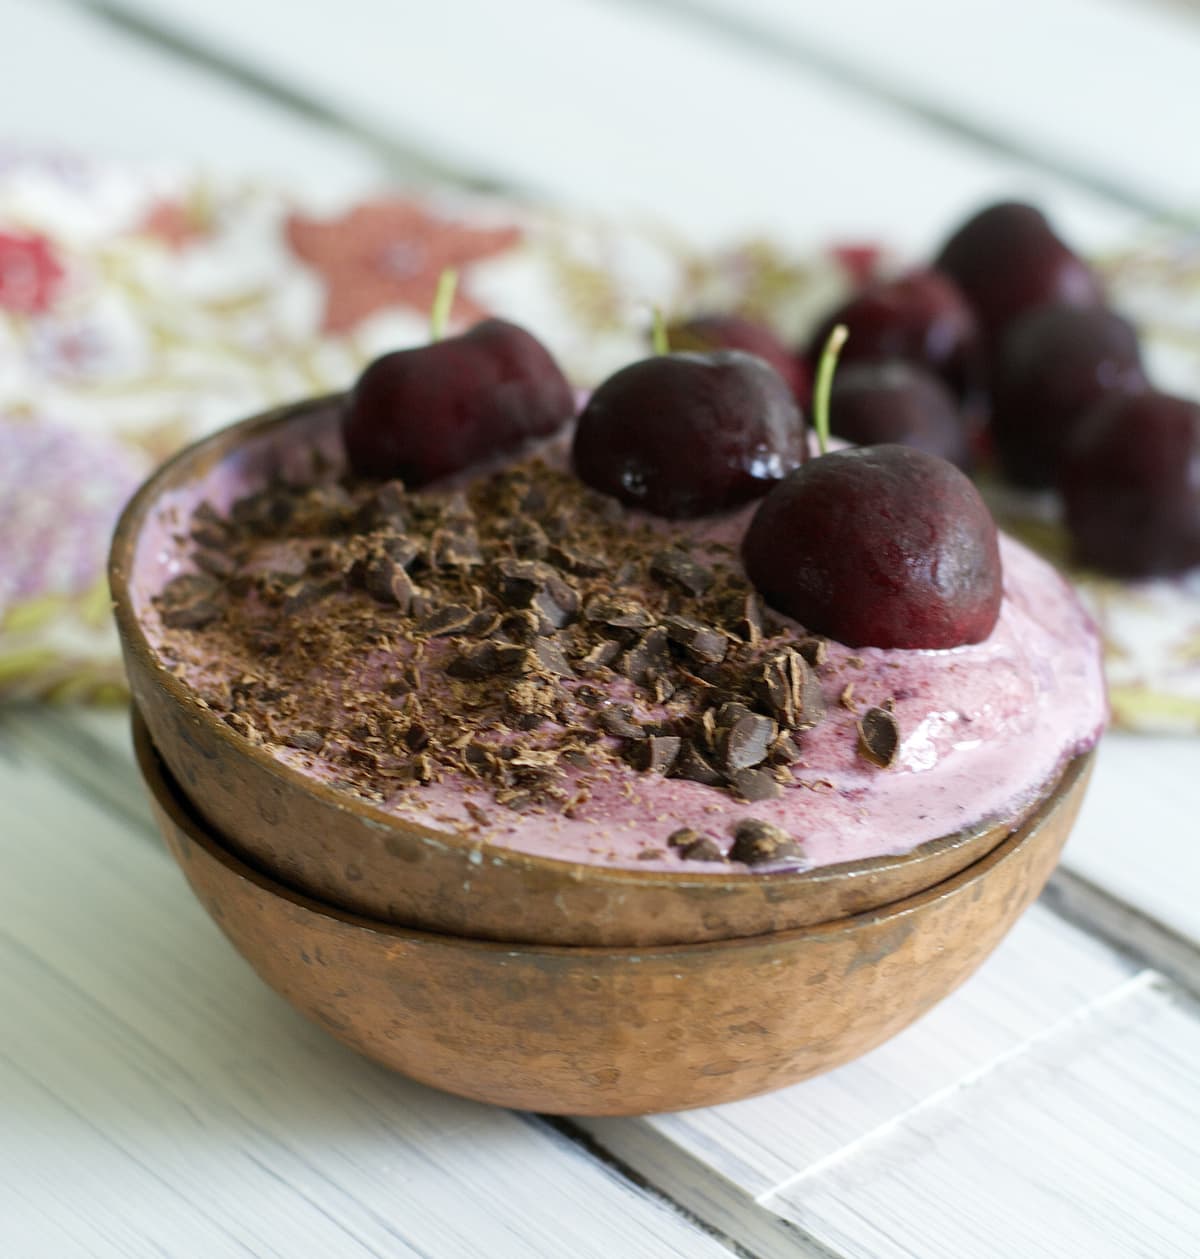 These sweet and creamy Chocolate Cherry Smoothie Bowls contain just four healthy ingredients!